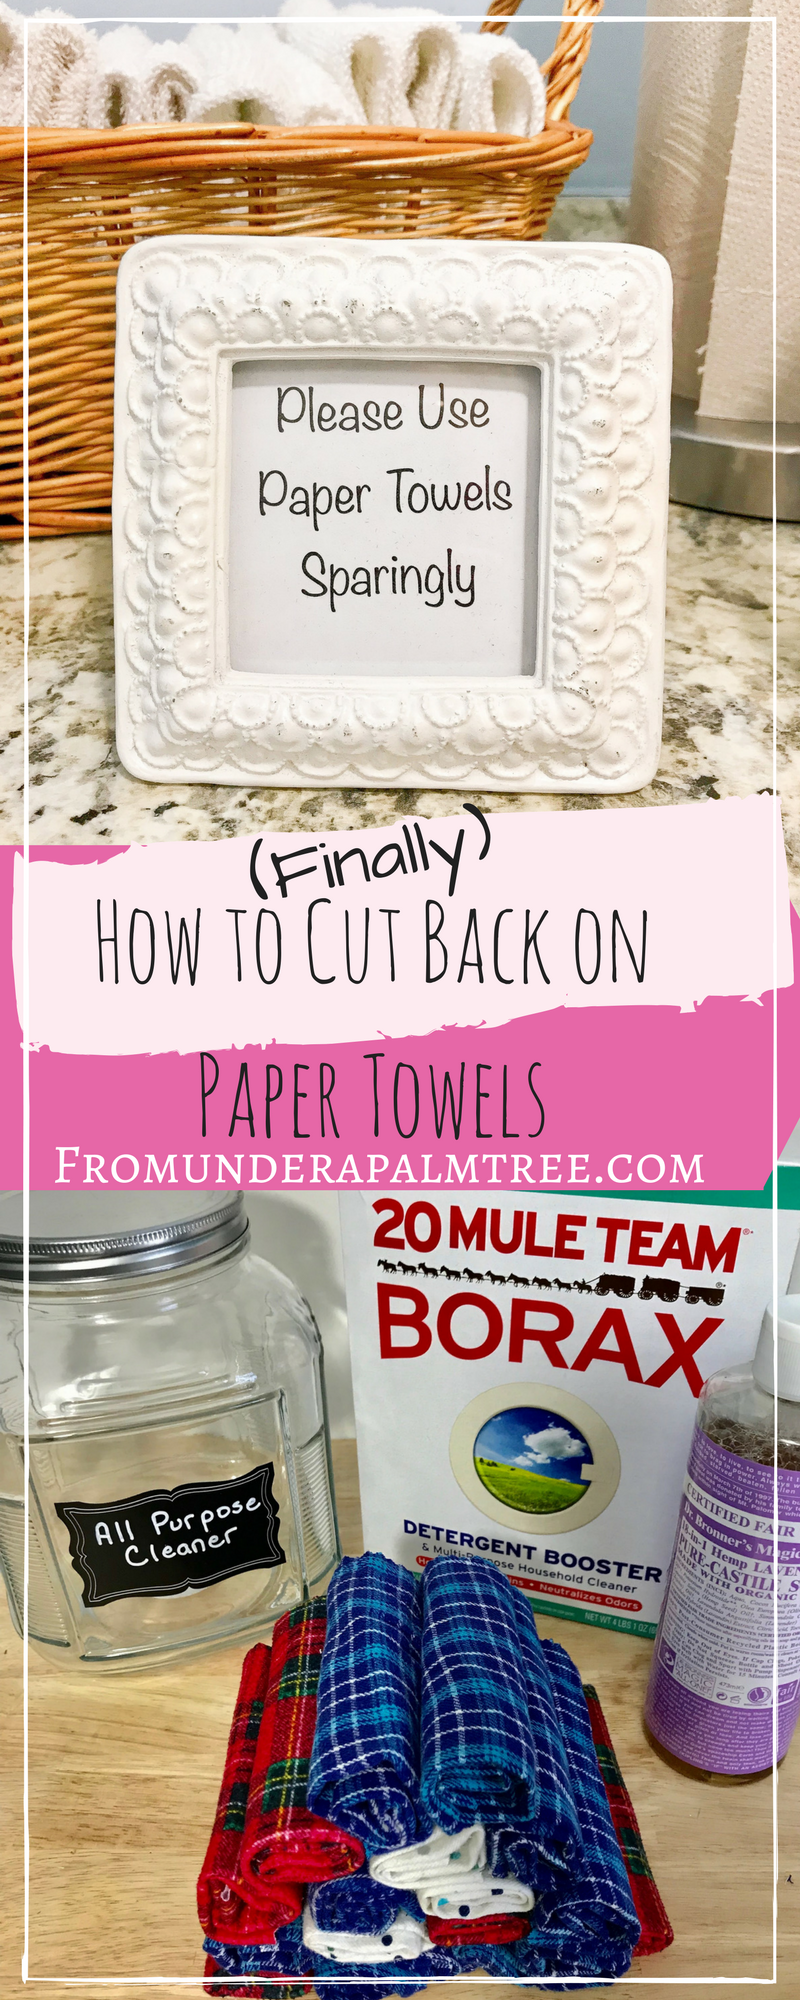 How to Cut Back on Paper Towels | Reusable Paper Towels | Fabric | UNpaper towels | Cut back on paper towels | How to | Reusable | paper towels | Paper towel Alternatives | Basket | Ideas | paperless | kitchen | organization | Green living | Green kitchen | sustainable living | sustainability | homemade paper towels | organic | homemade soap |